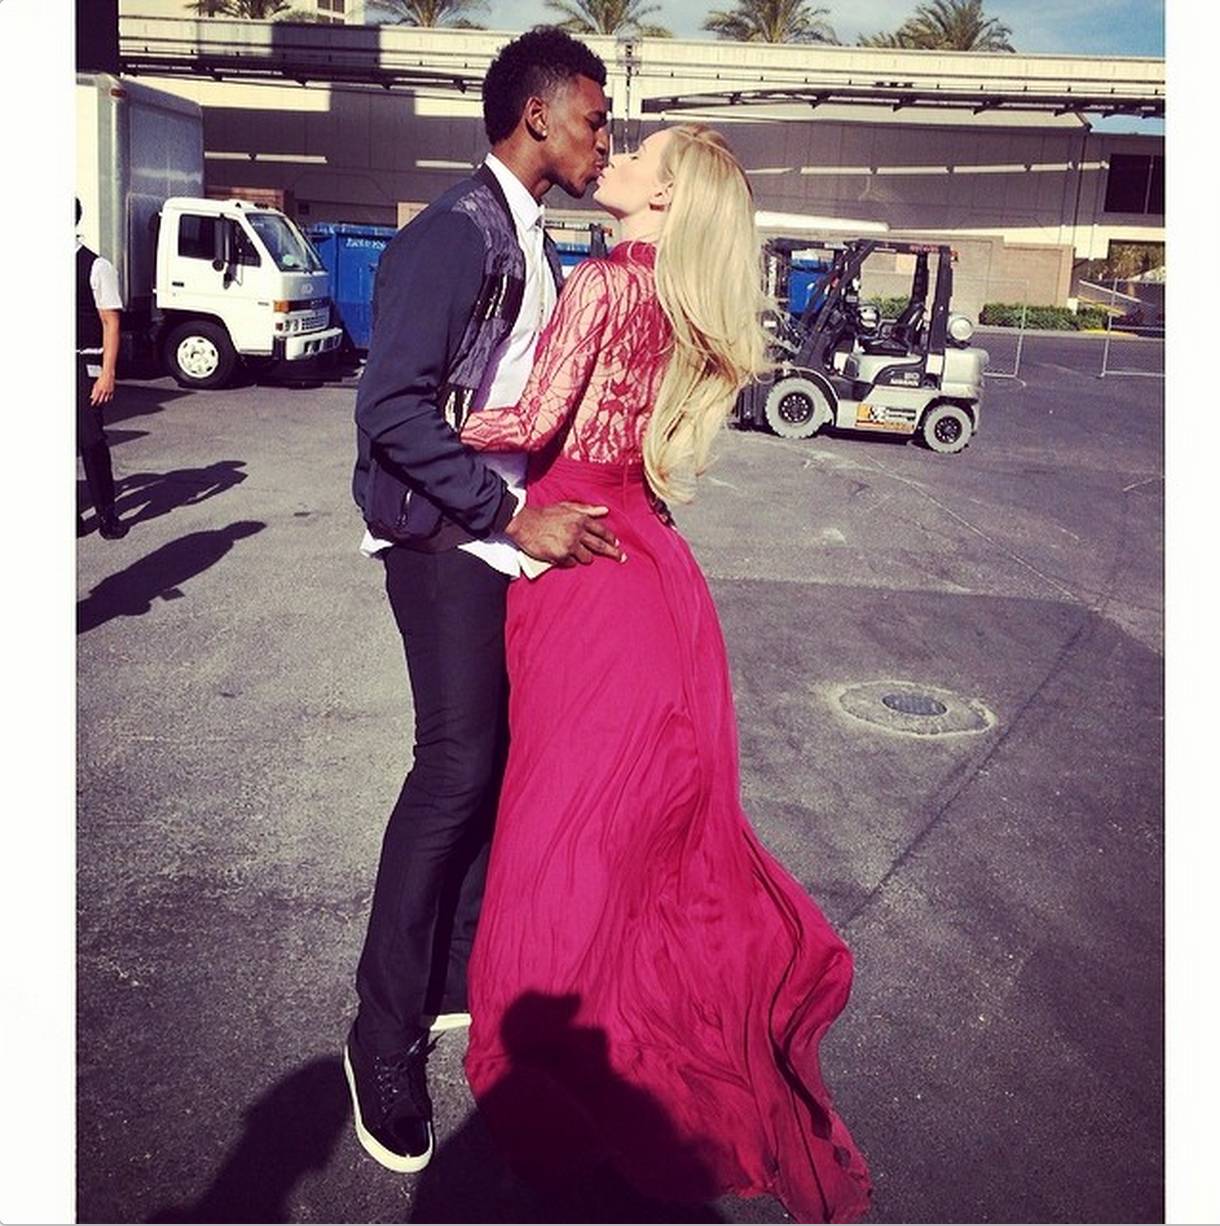 Nick Young, @swaggyp1 - - Image 5 from For the Love of Iggy Azalea